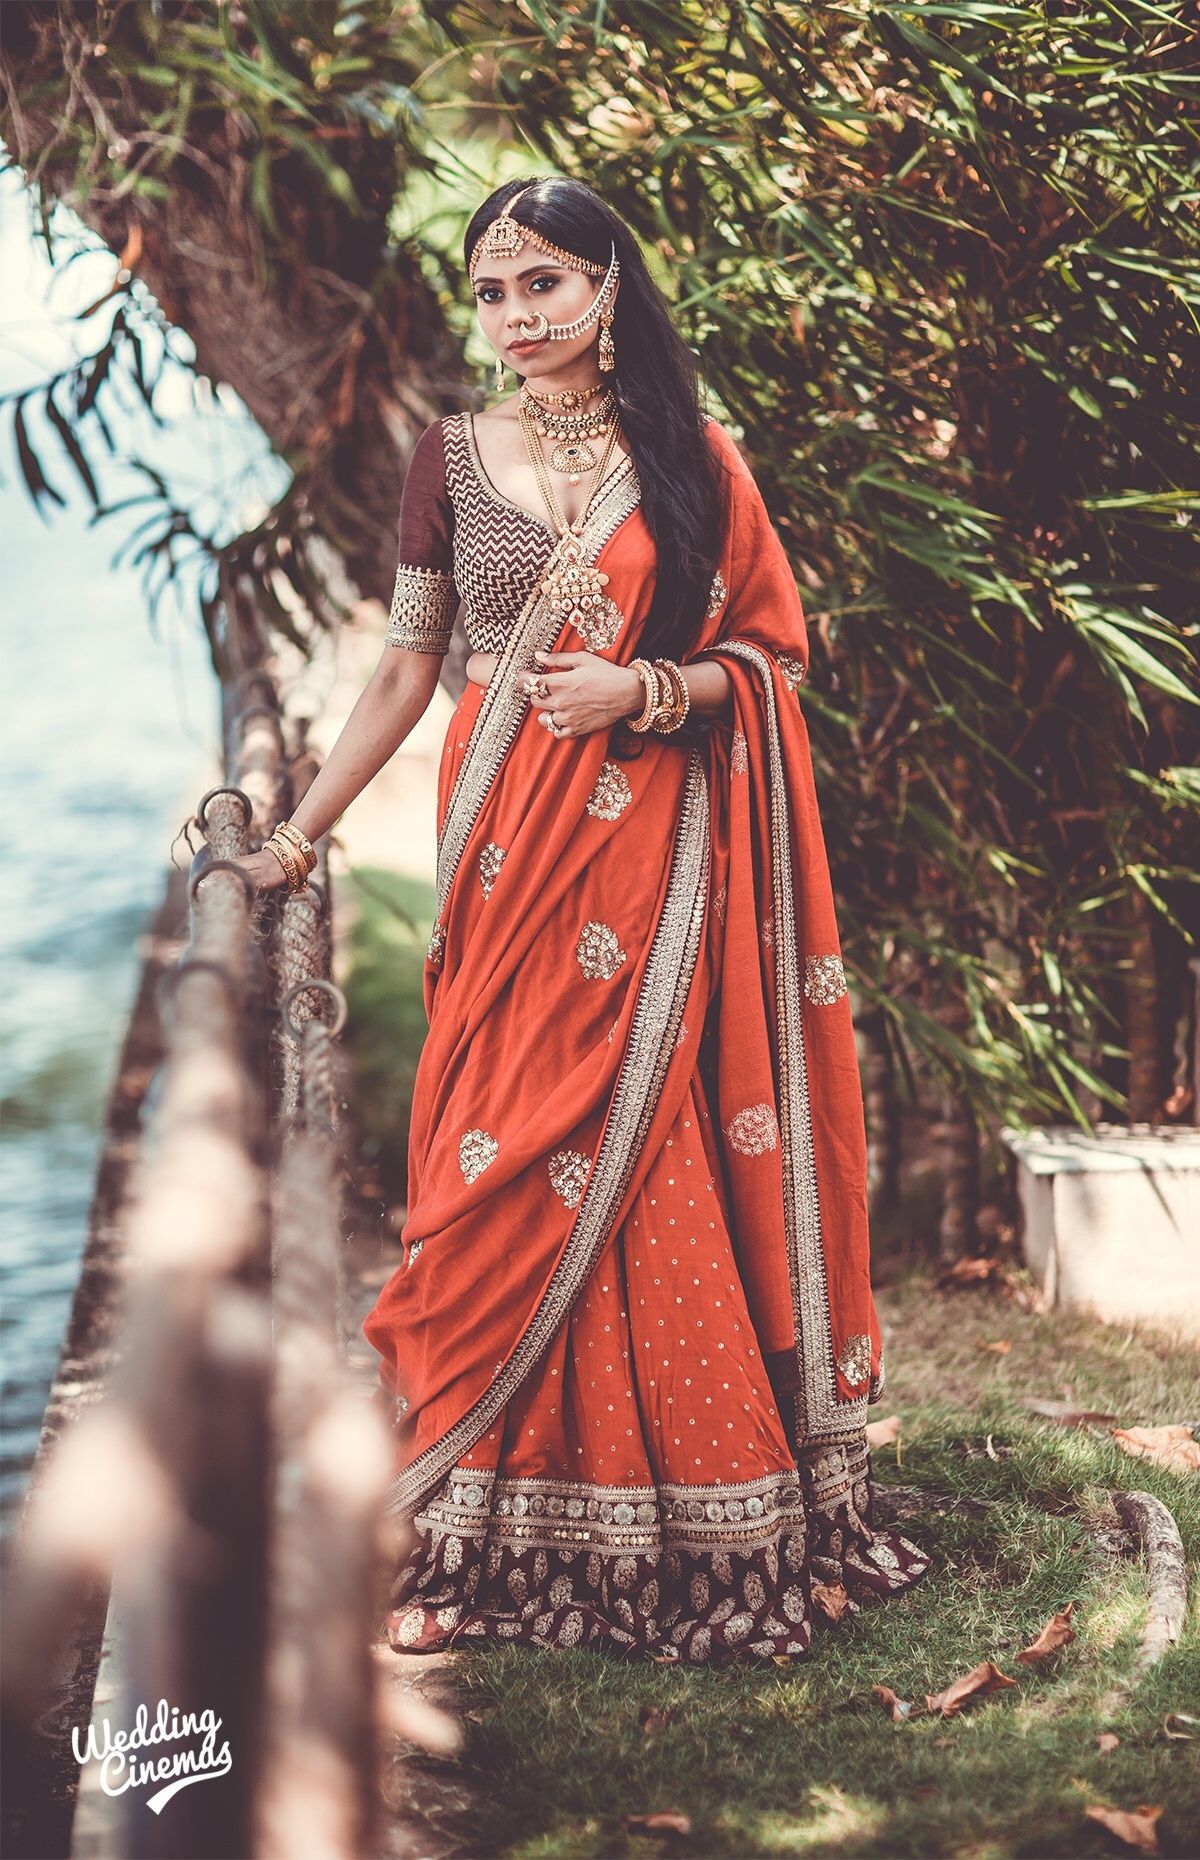 Kerala Brides With Gorgeous South Indian Bride Look | WedMeGood